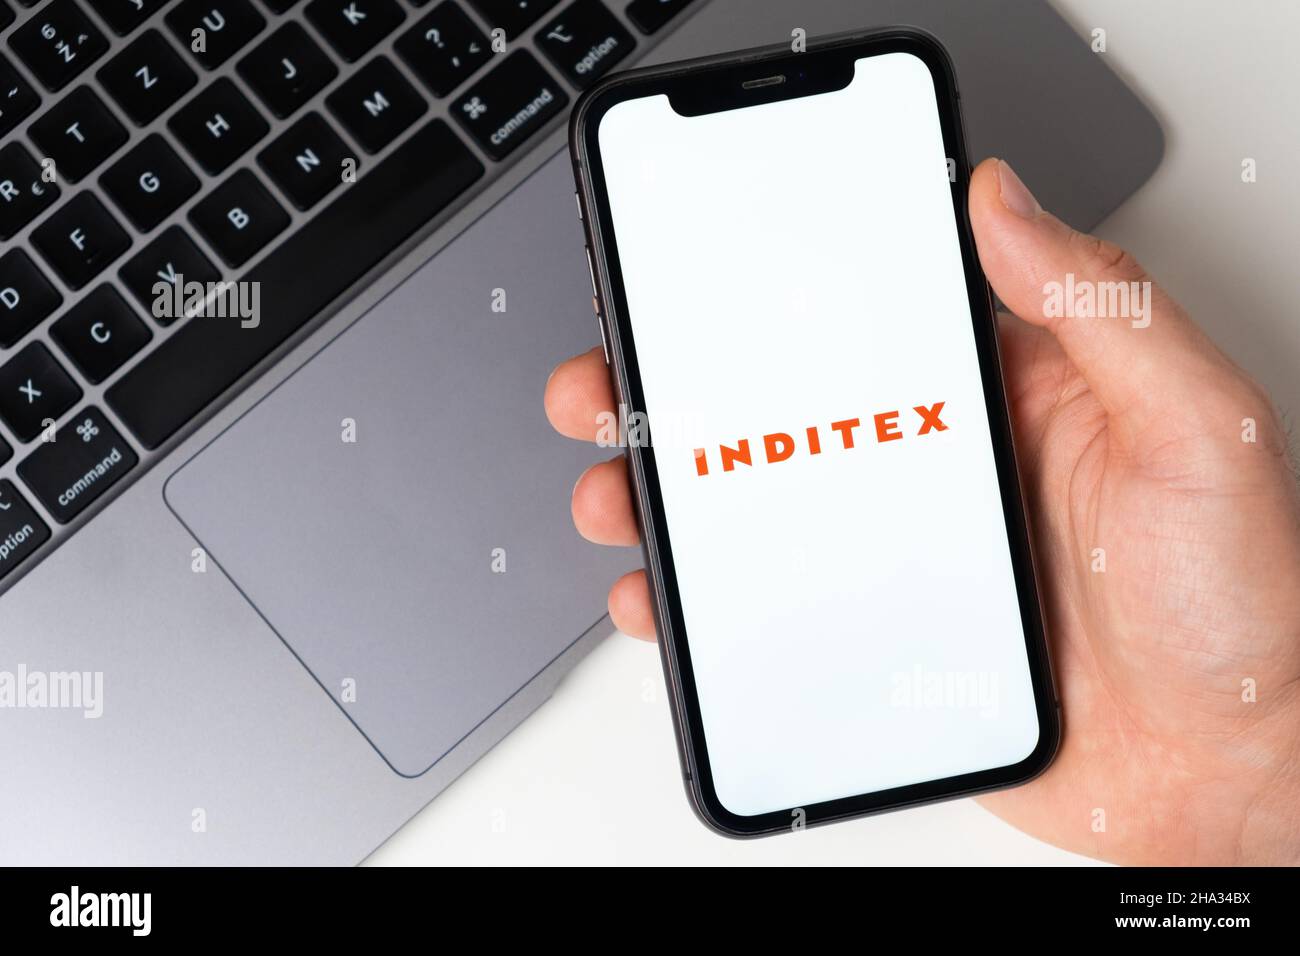 Inditex mobile application on the smartphone screen. Make purchases while sitting at home using a mobile app or laptop. A smartphone in a man hand. November 2021, San Francisco, USA Stock Photo